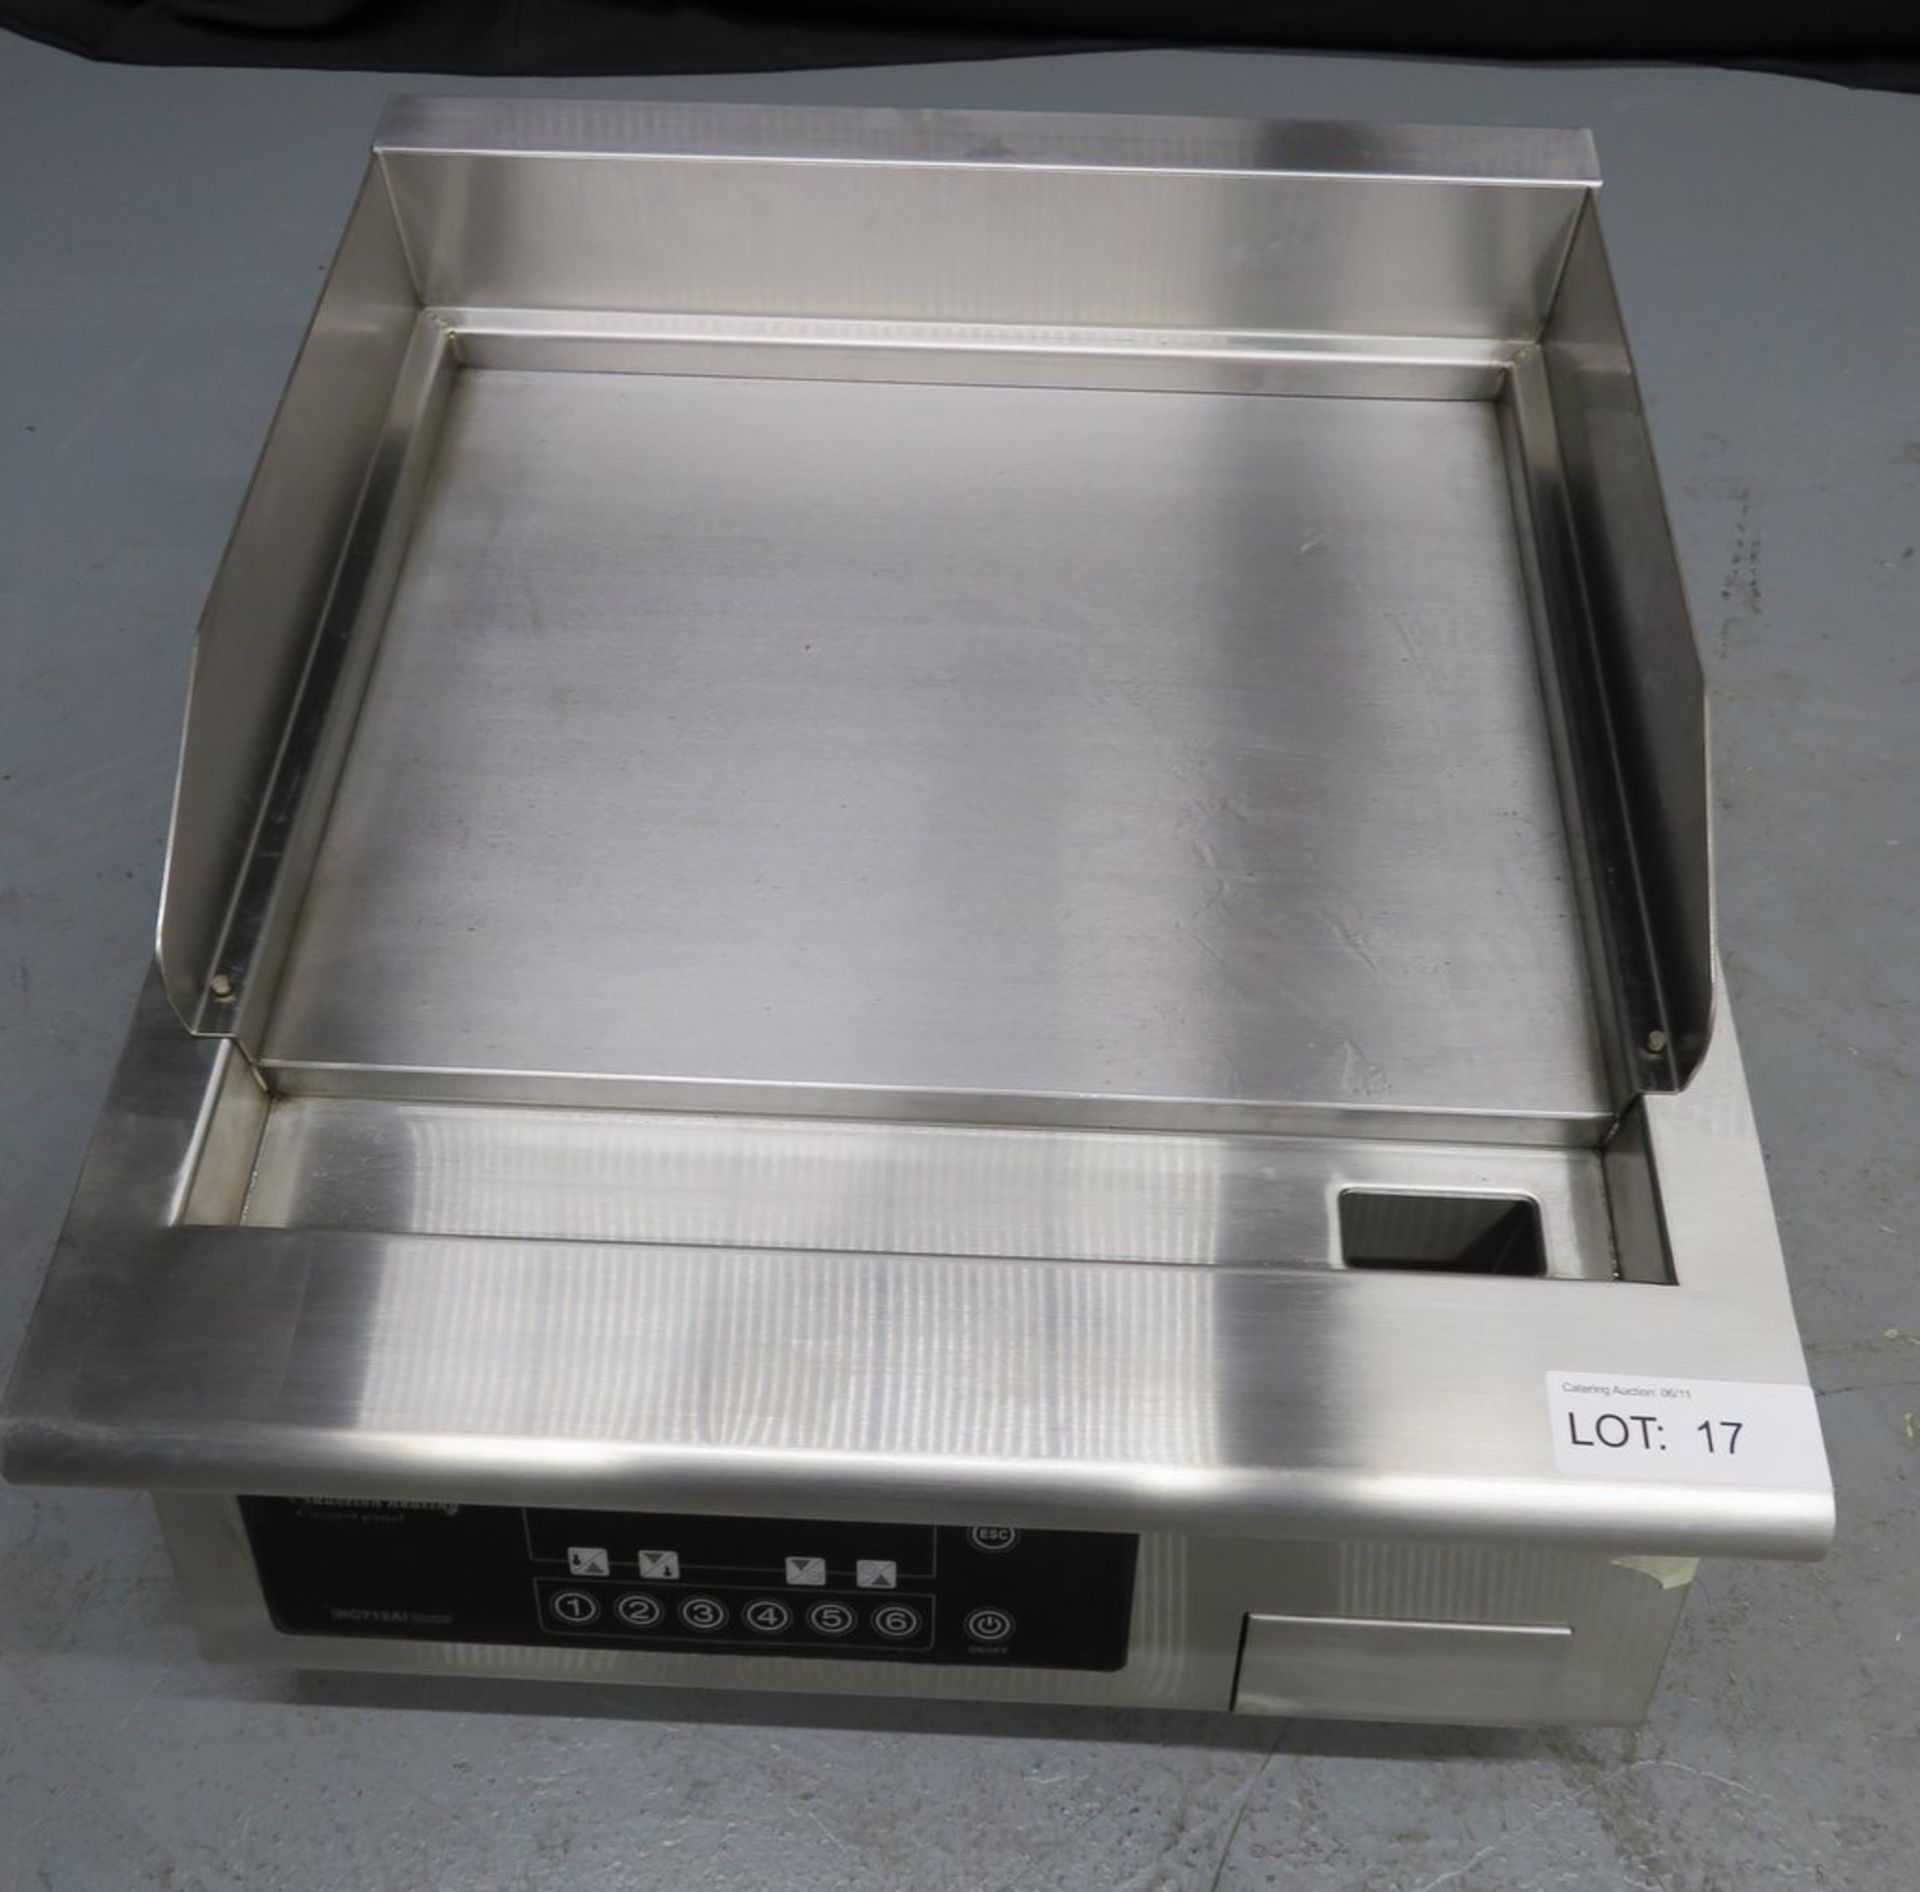 Heavy duty countertop induction griddle (smooth), model RDE-FG-6A, 3 phase, brand new & boxed - Image 4 of 9